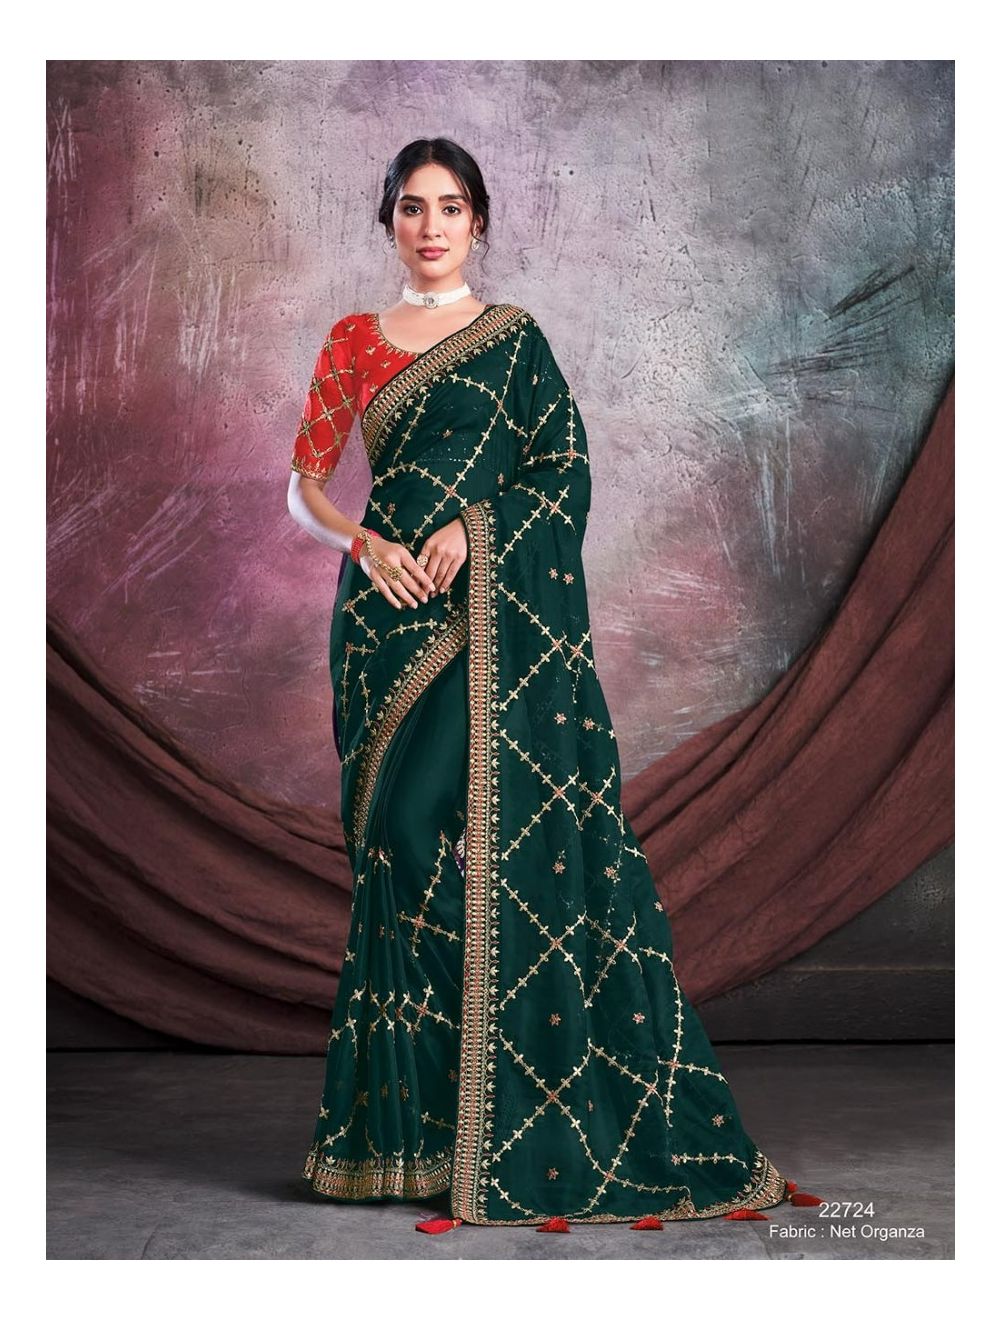 Nidhhi Agerwal aces ethnic look in a green organza saree!